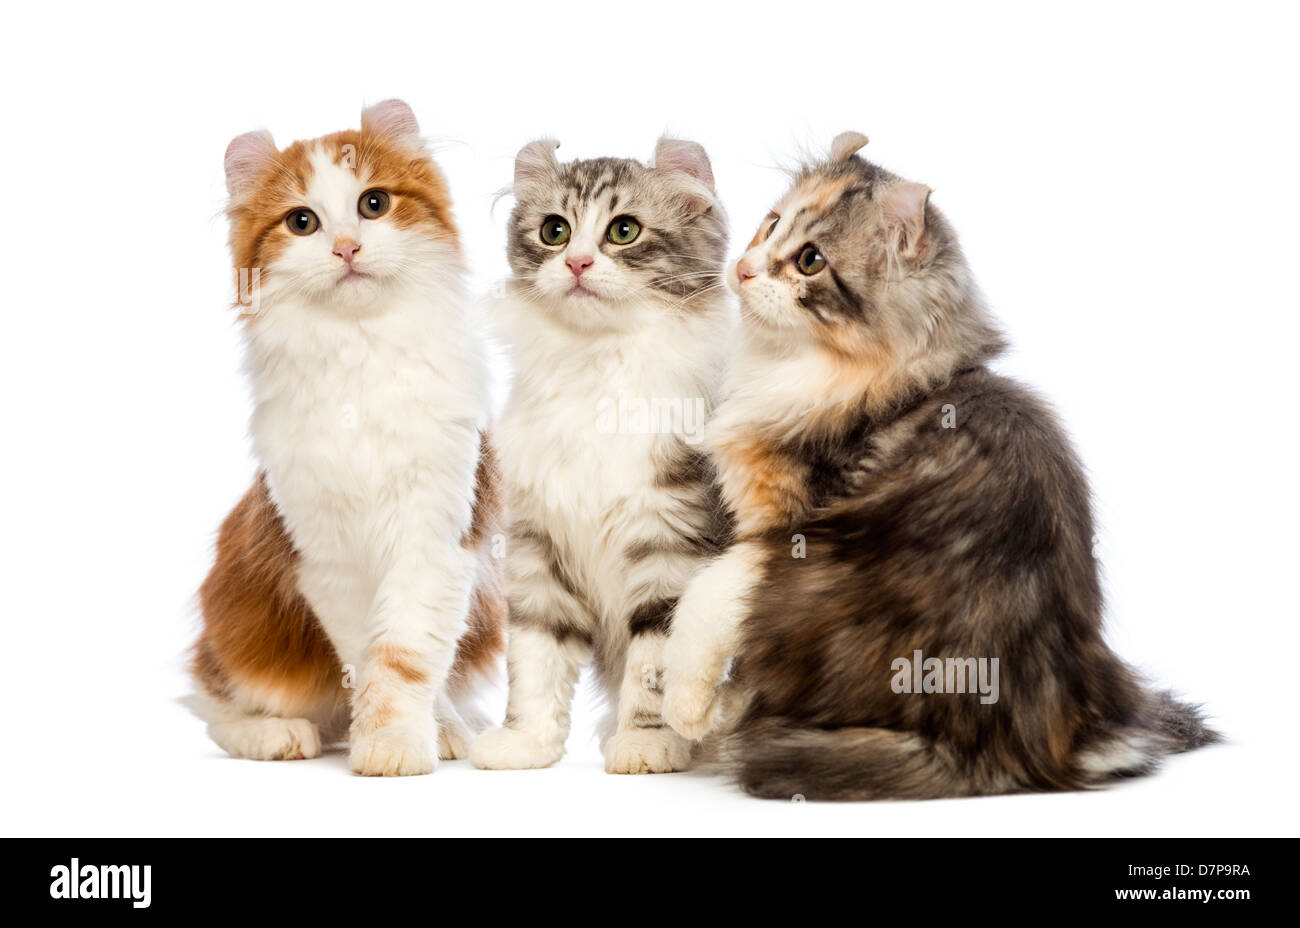 Three American Curl kittens, 3 months old, sitting and looking away and at the camera against white background Stock Photo